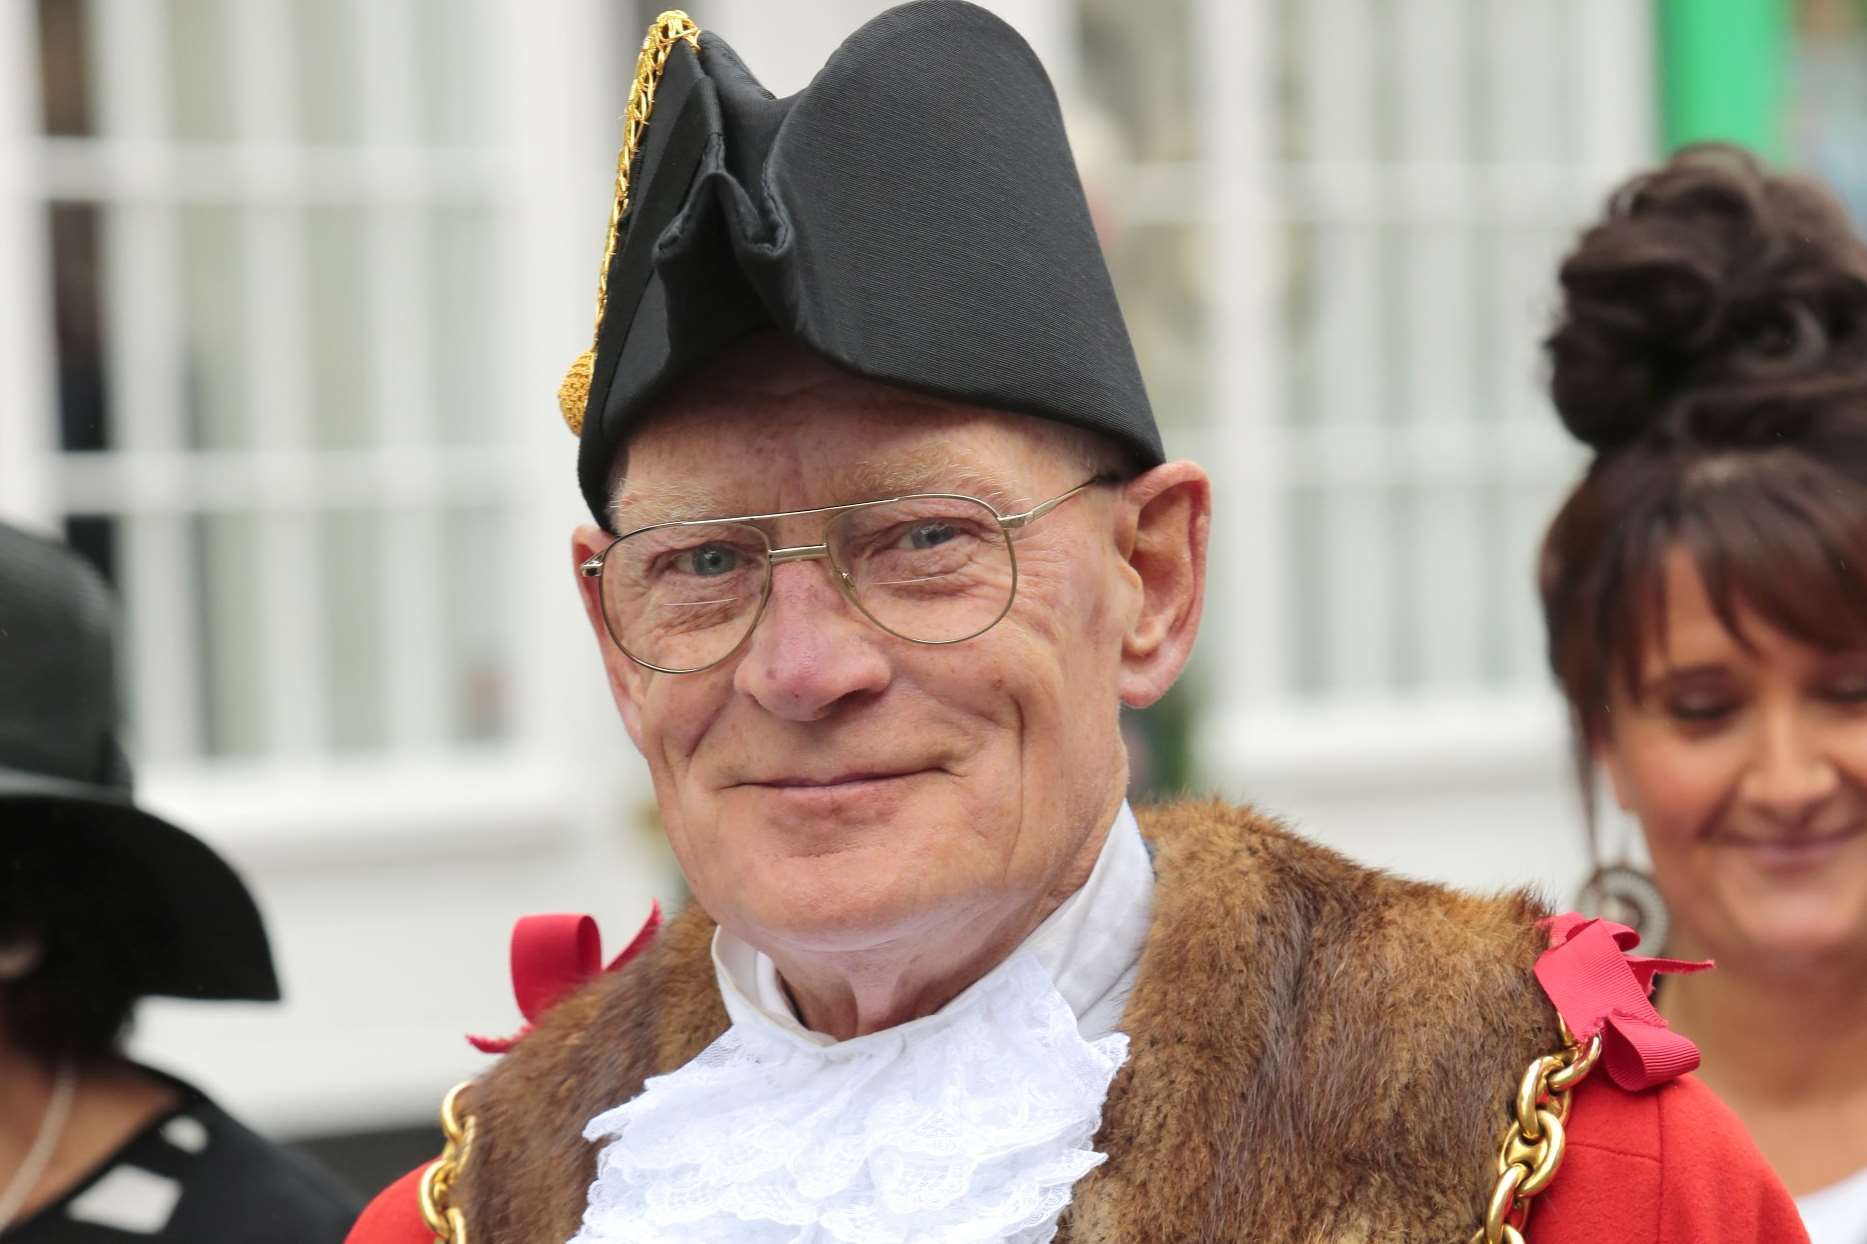 Daniel Moriarty during his term as Maidstone Mayor